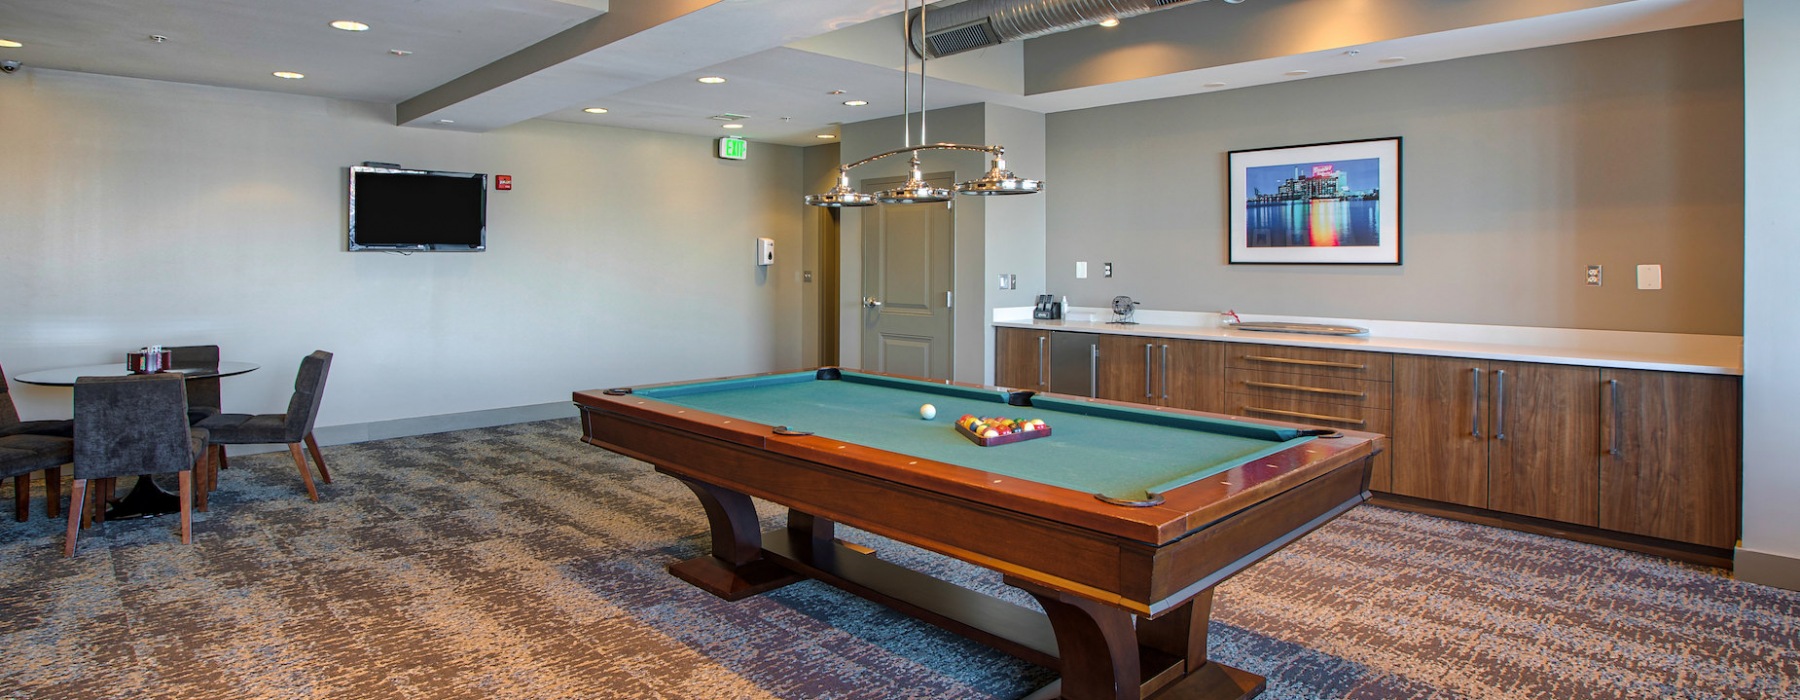 Game room with billiards table 